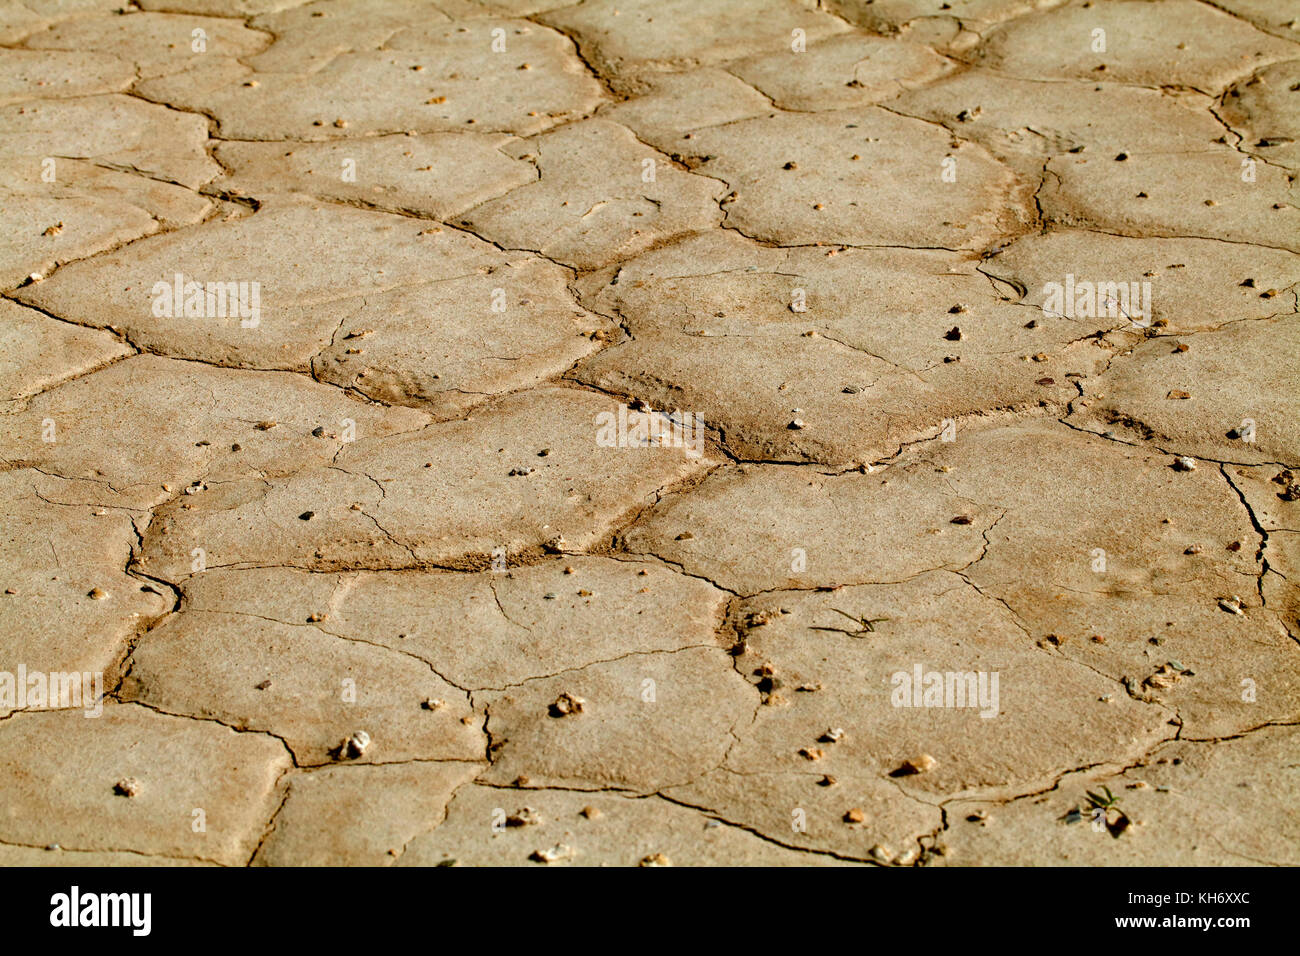 Cracked earth close-up Stock Photo